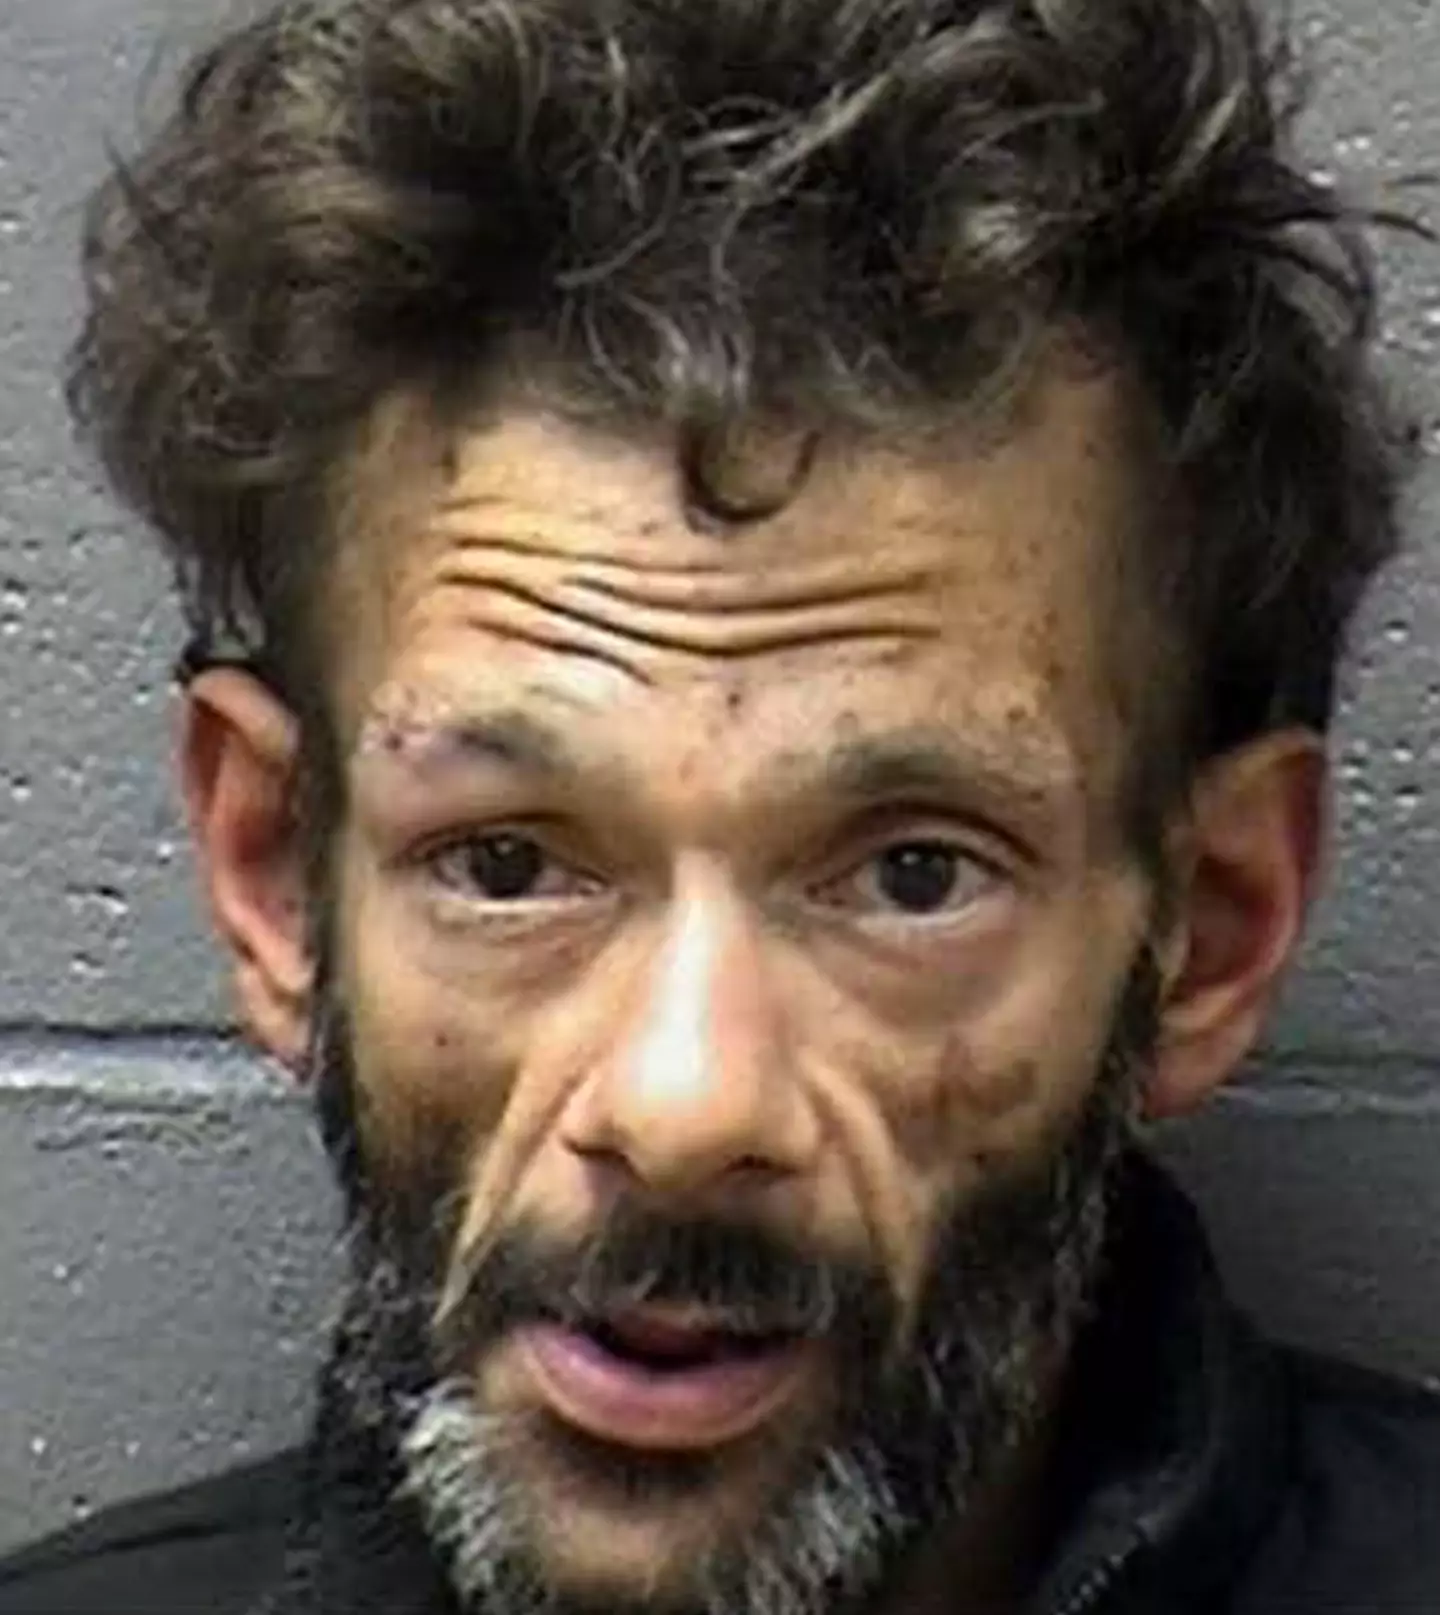 Shaun Weiss poked fun at his own mugshot, taken in January 2020 after his arrest for burglary.